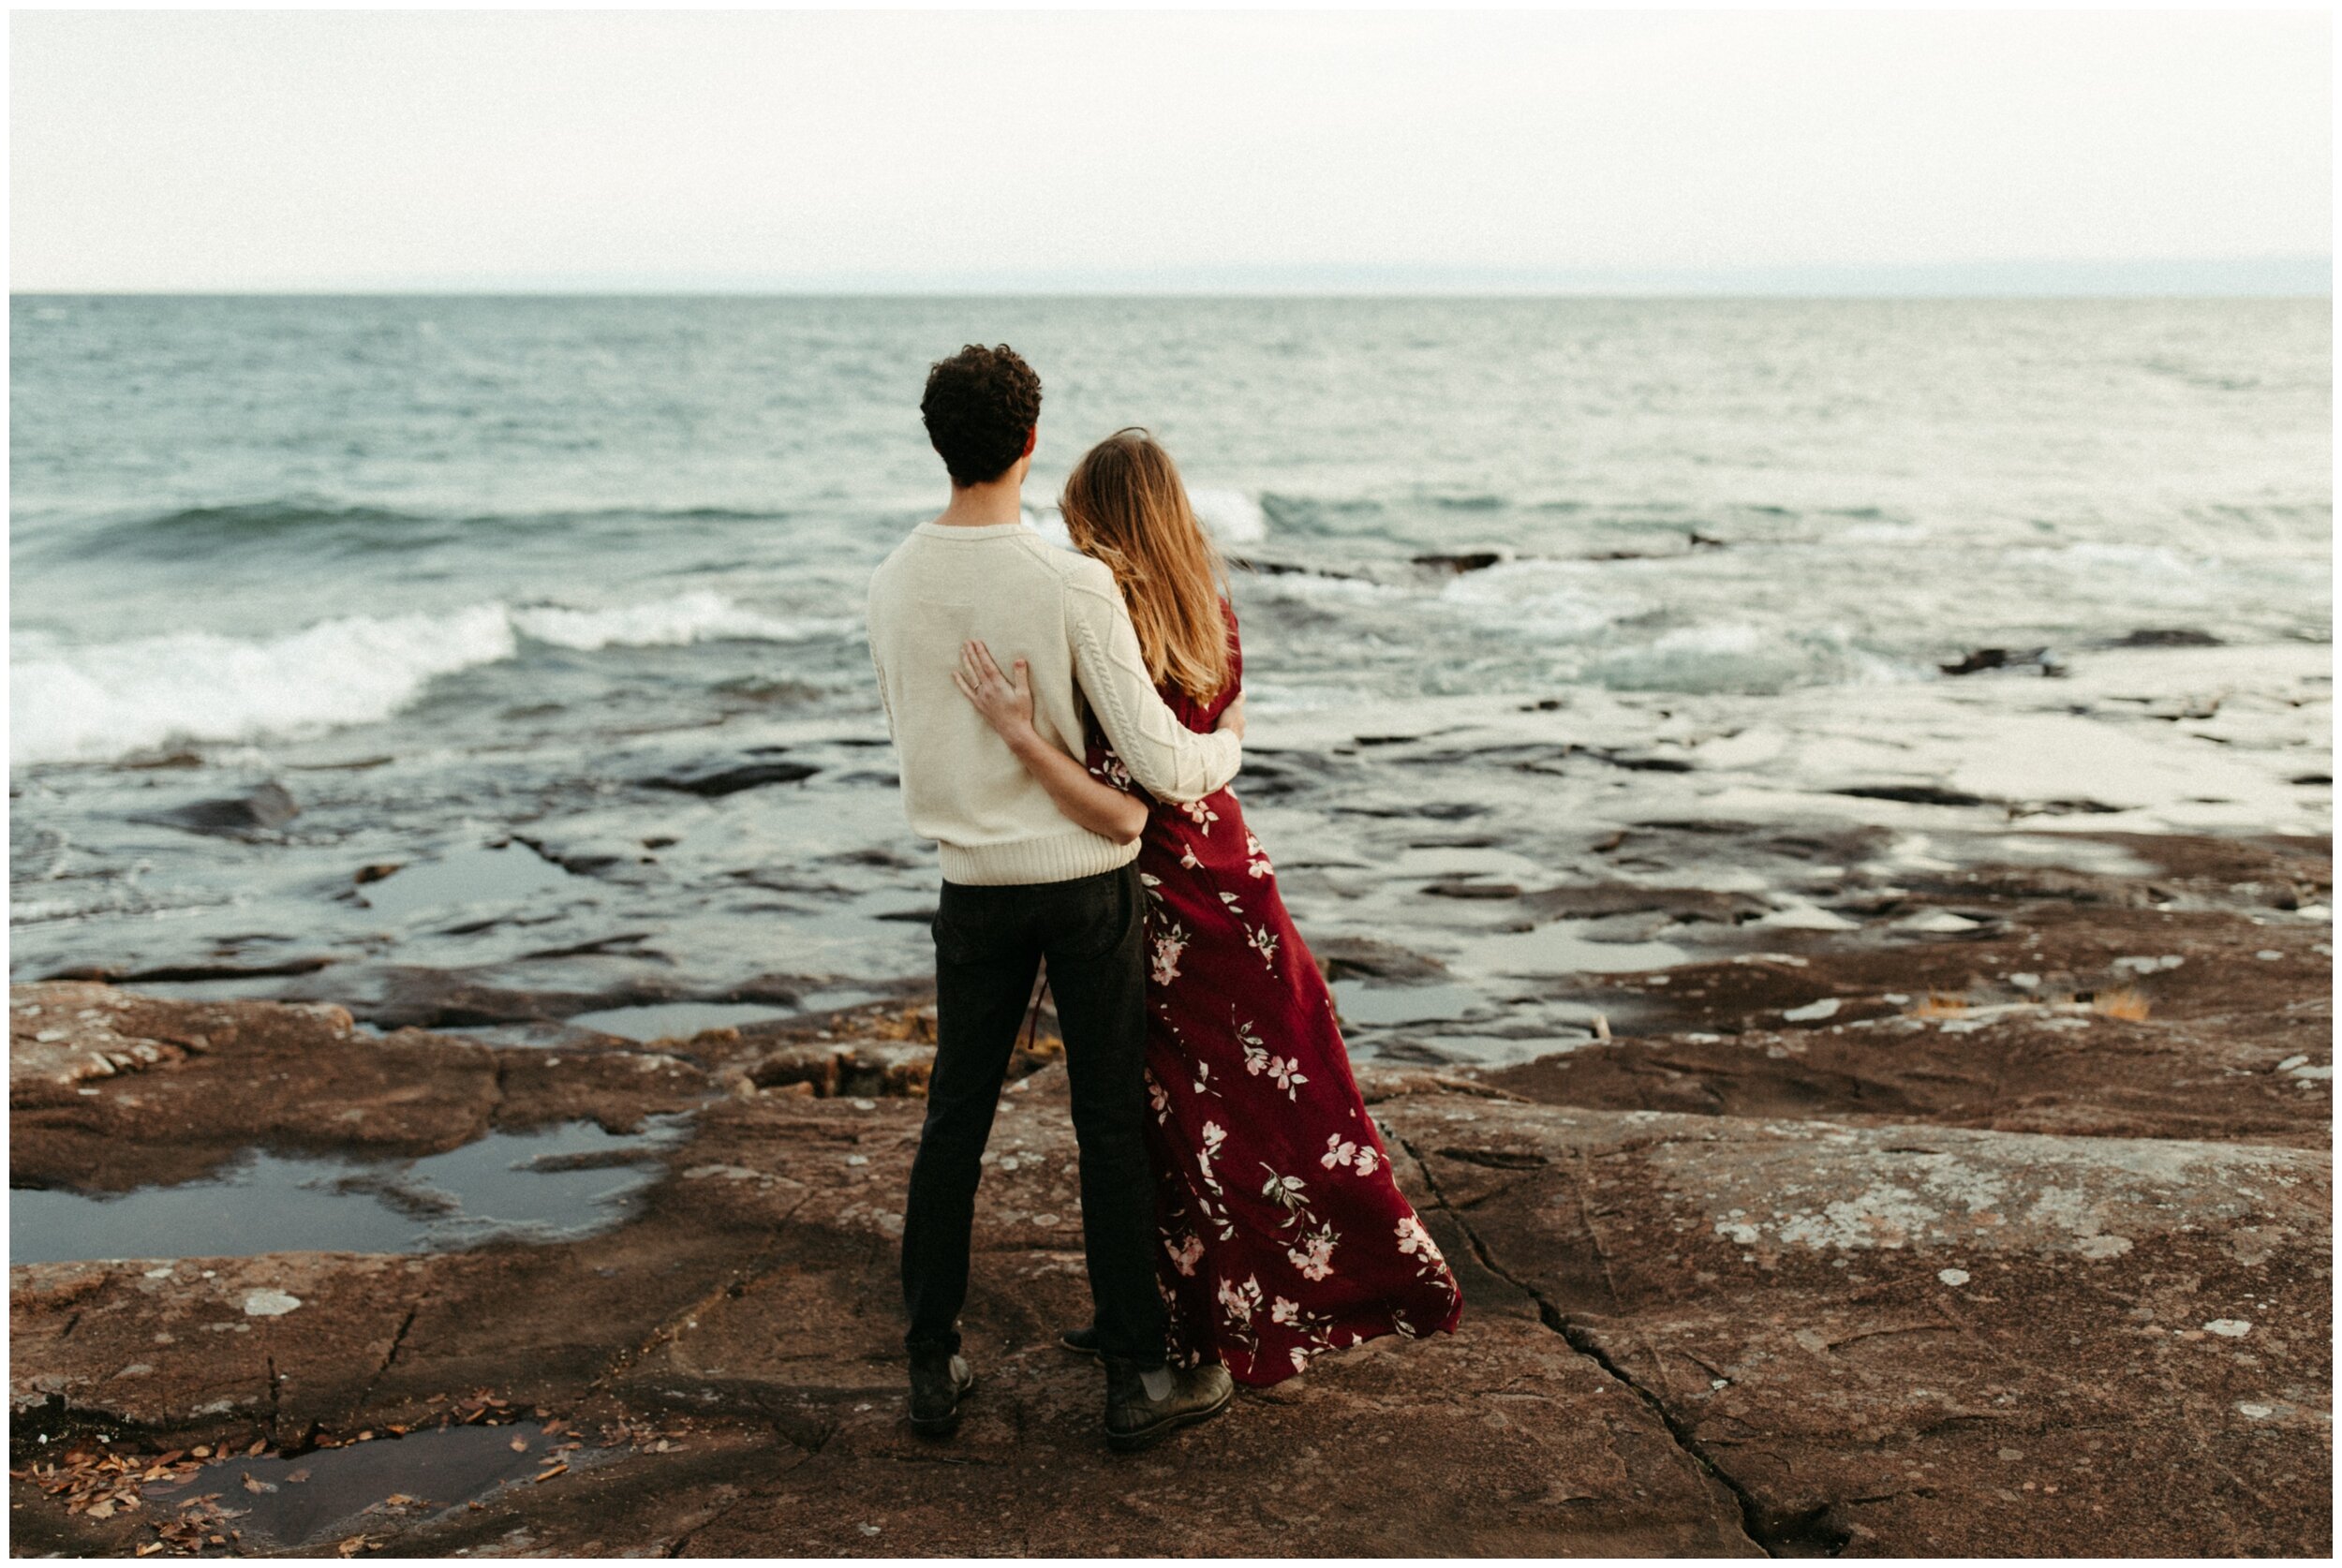 North shore engagement session at Artist Point in Grand Marais, MN photographed by wedding photographer Britt DeZeeuw